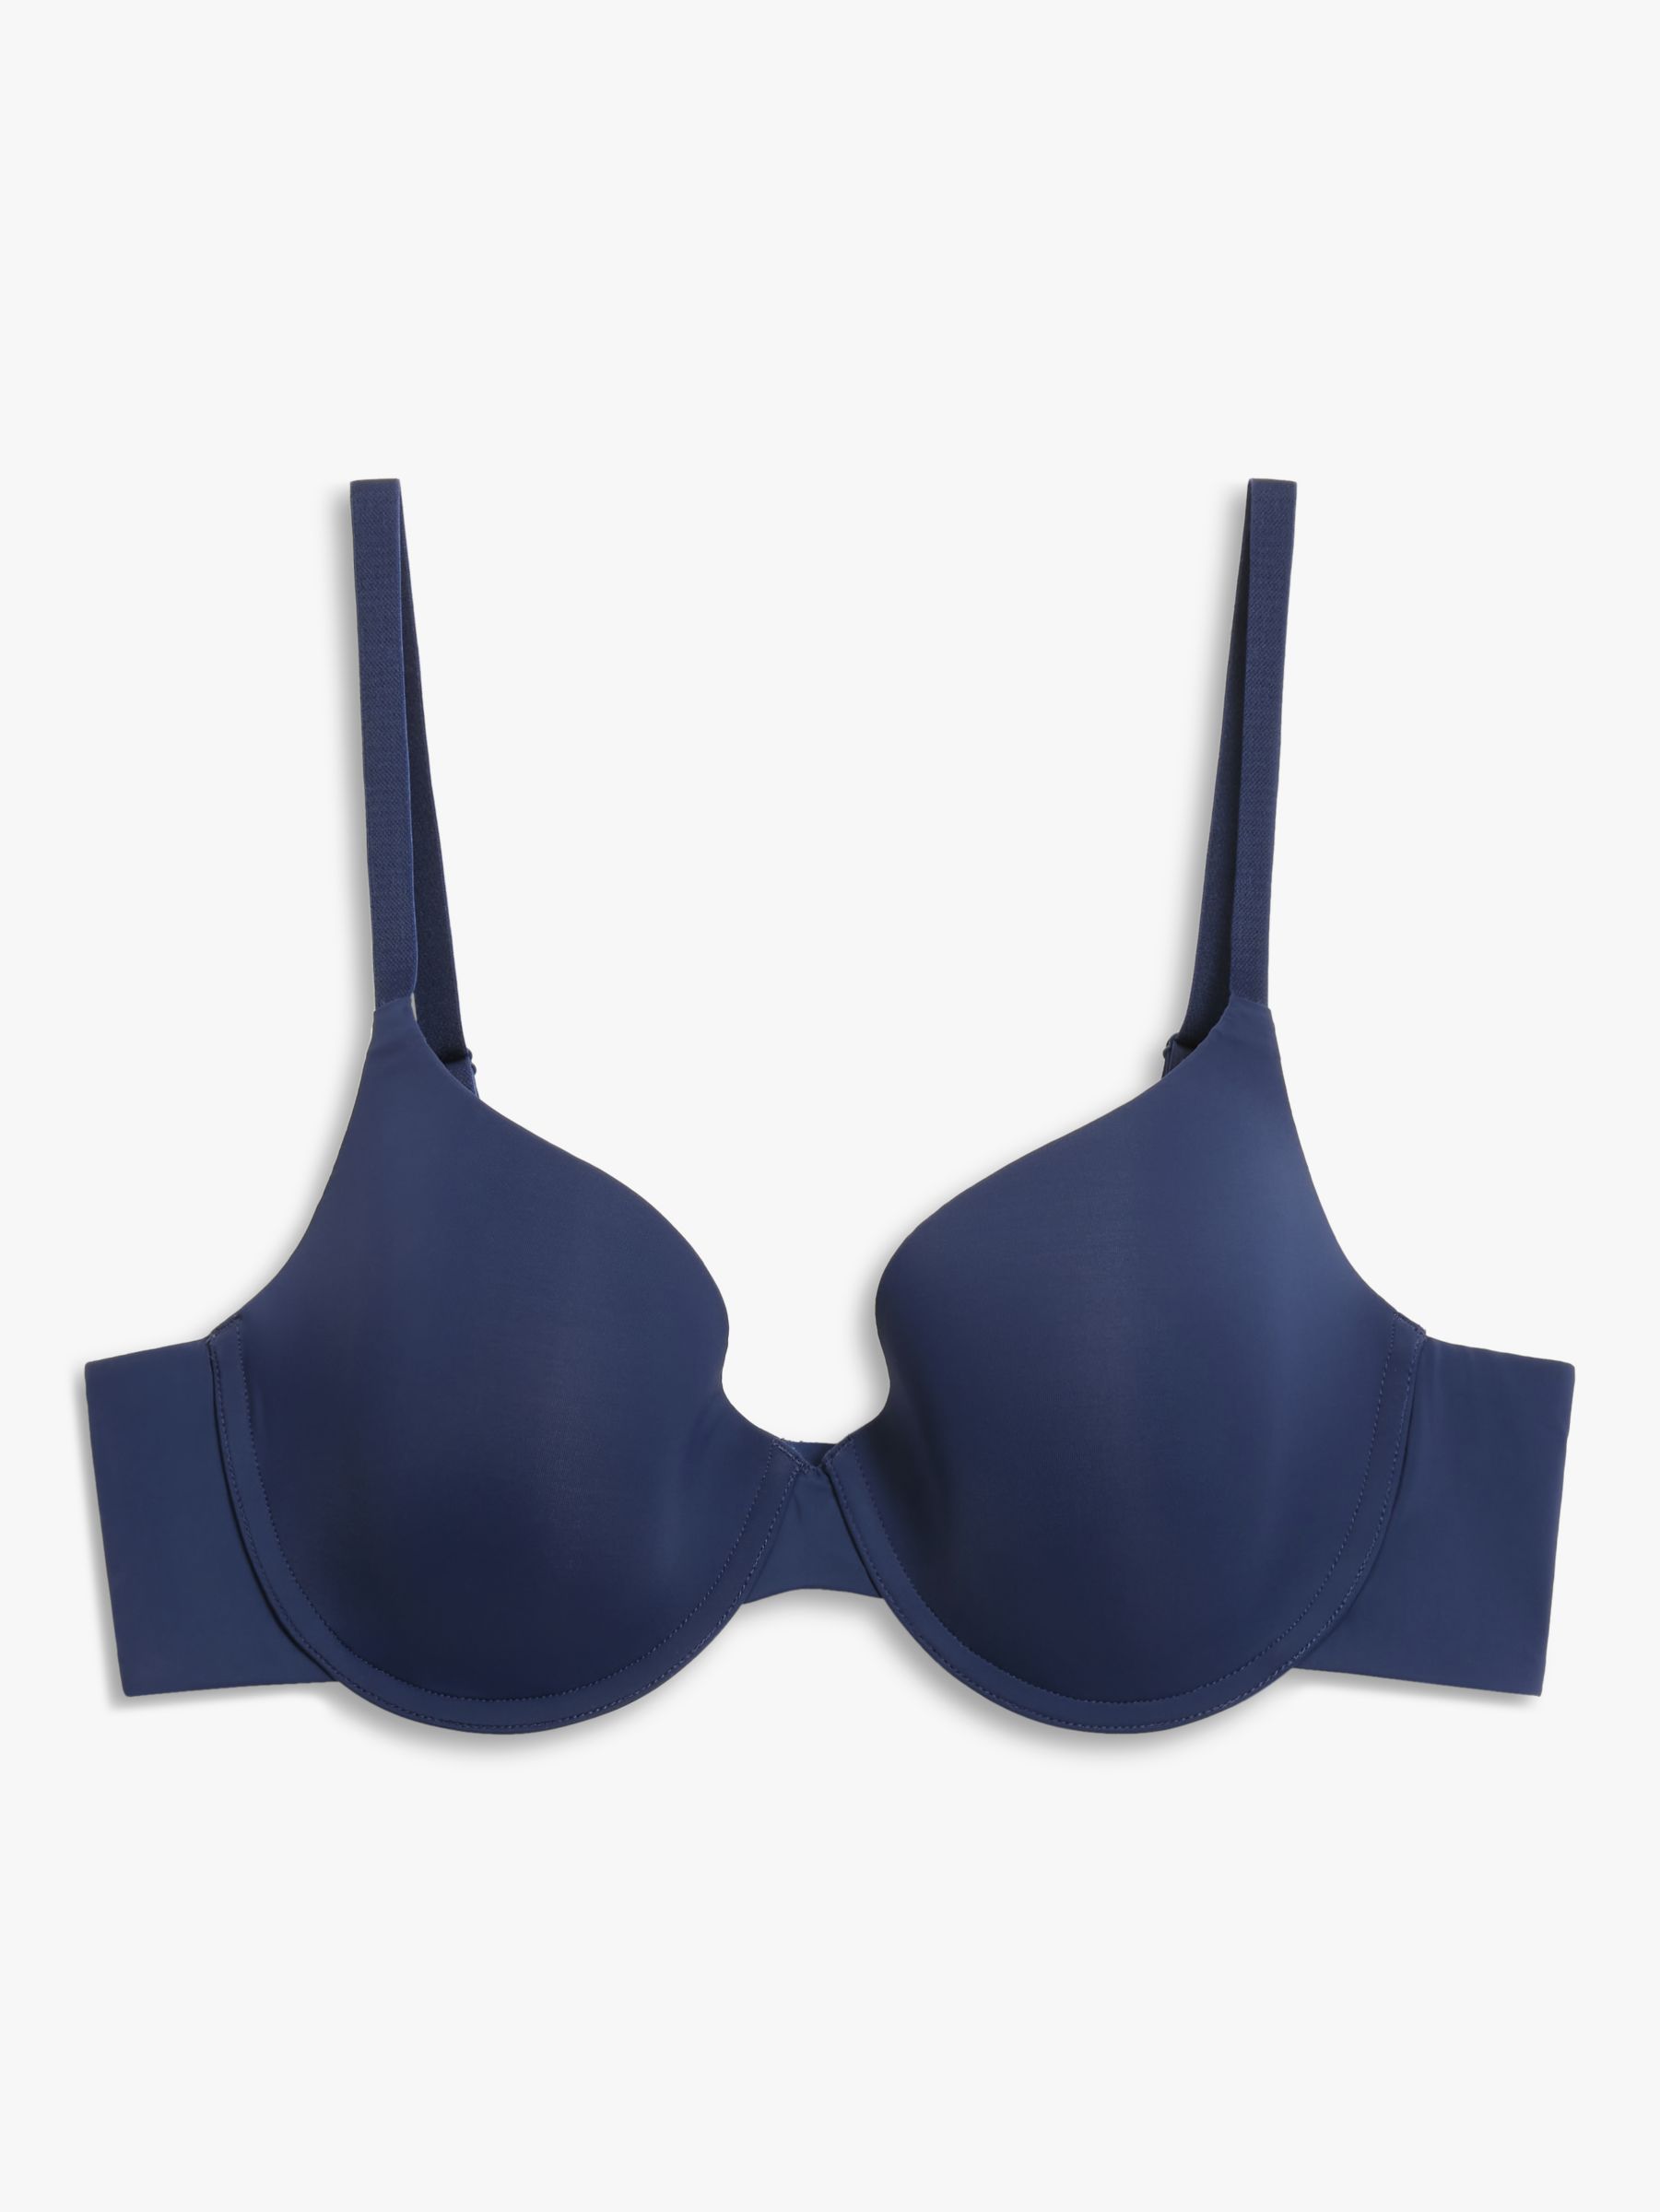 John Lewis AND/OR Aliyah Non Padded Lace Demi Bra, Blue Size 32DD BNWT